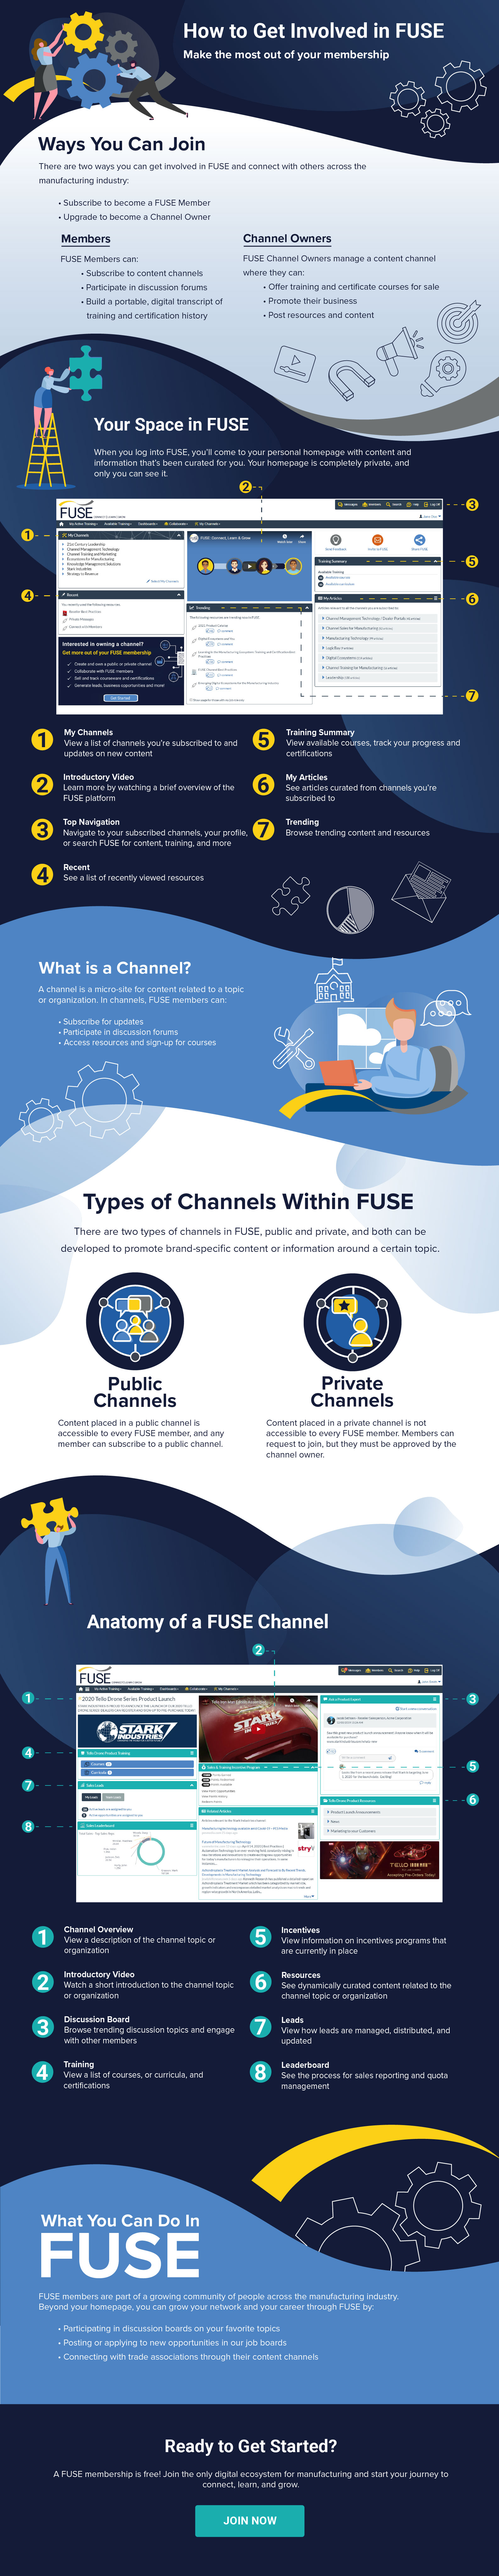 FUSE_Infographic_2020_sm